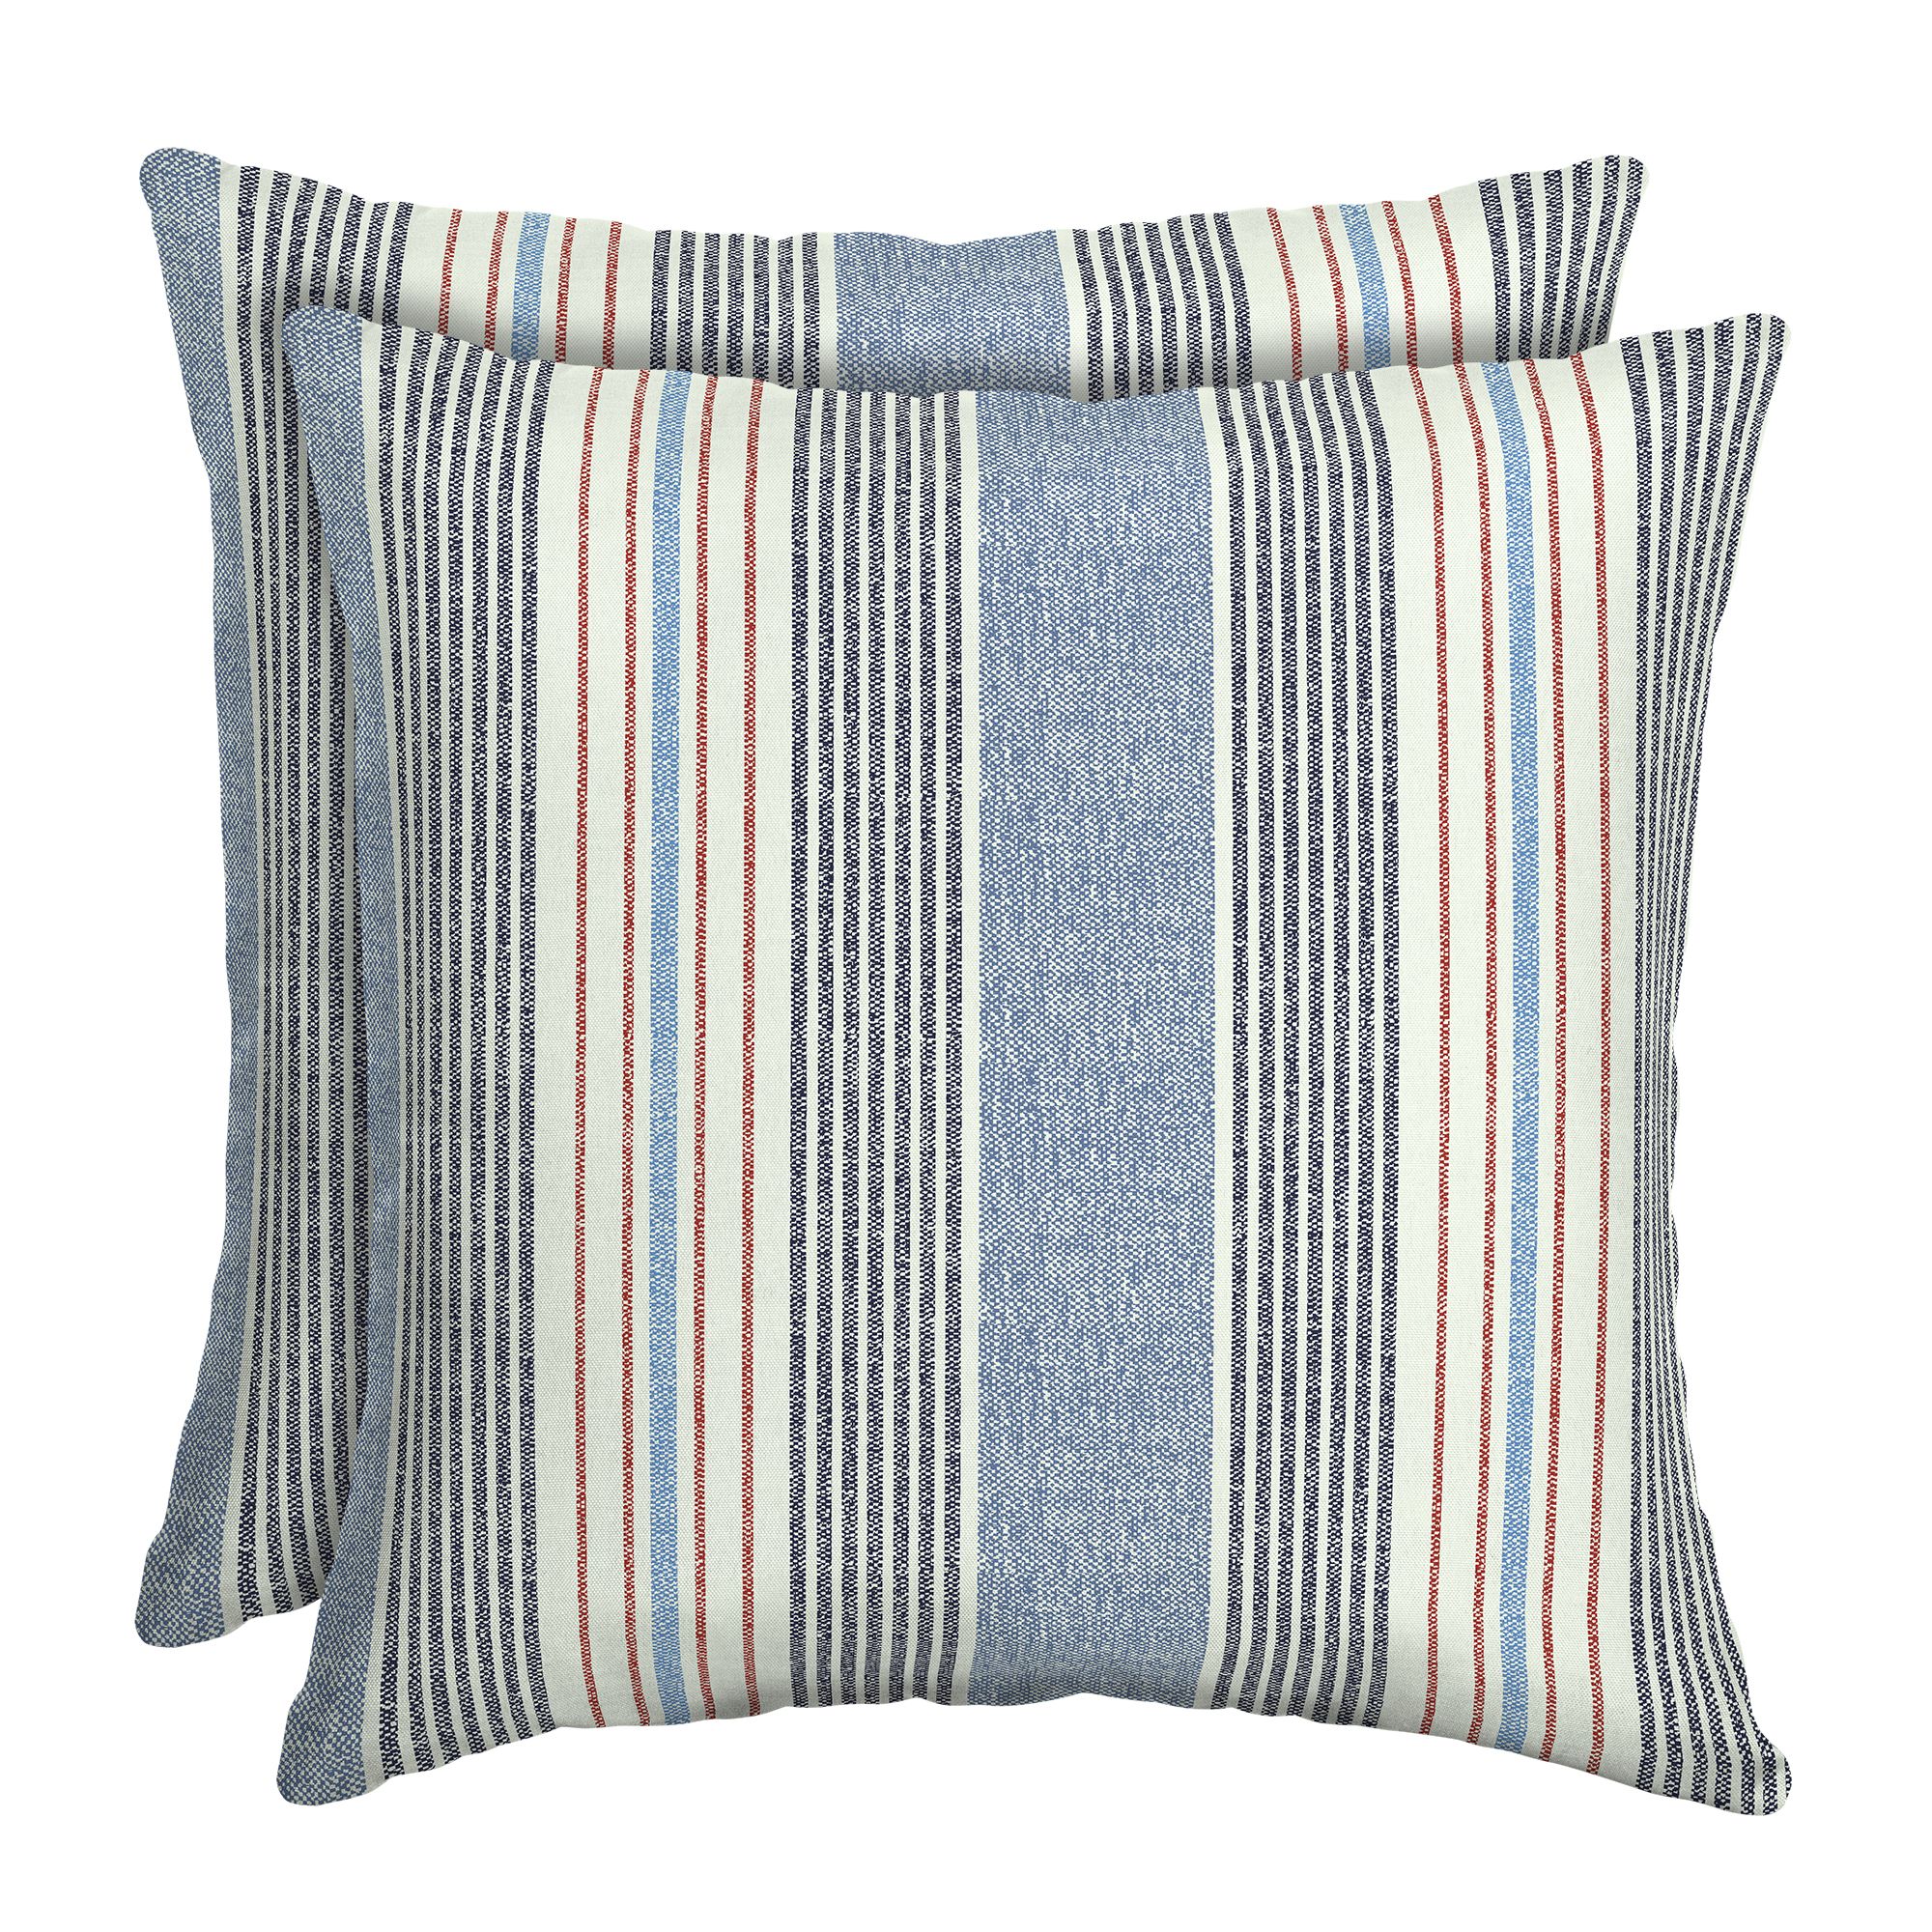 Better Homes & Gardens Hickory Stripe 16 x 16 in. Outdoor Pillow, Set of 2 - image 1 of 7